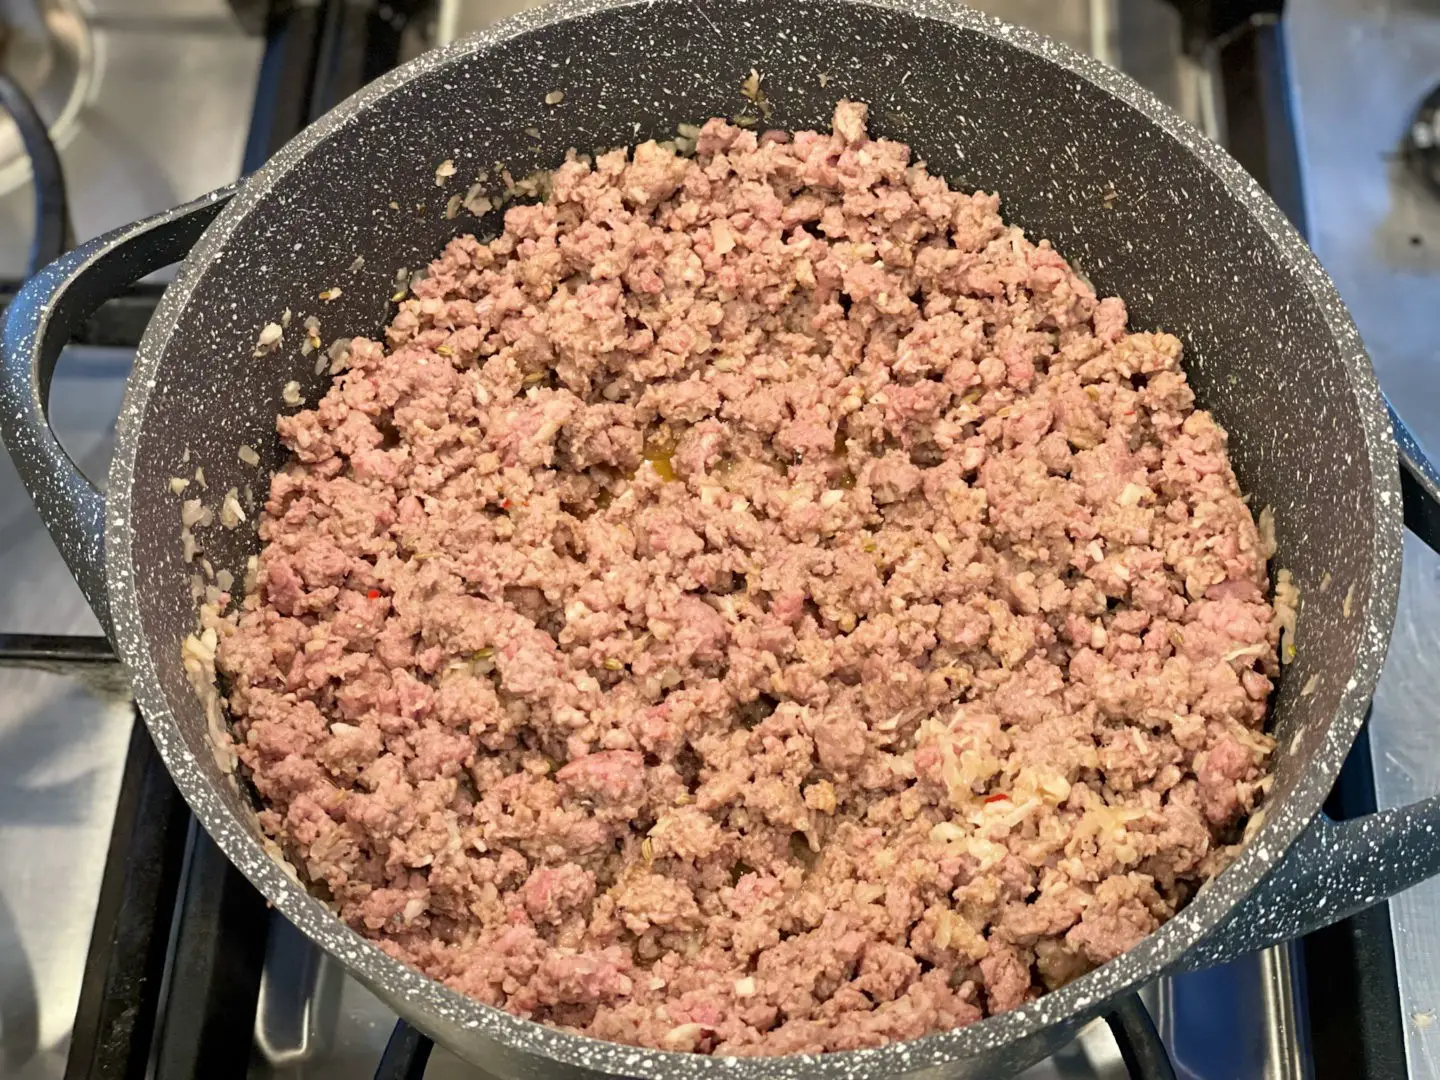 Browning meat sauce containing ground beef, Italian sausage and ham.